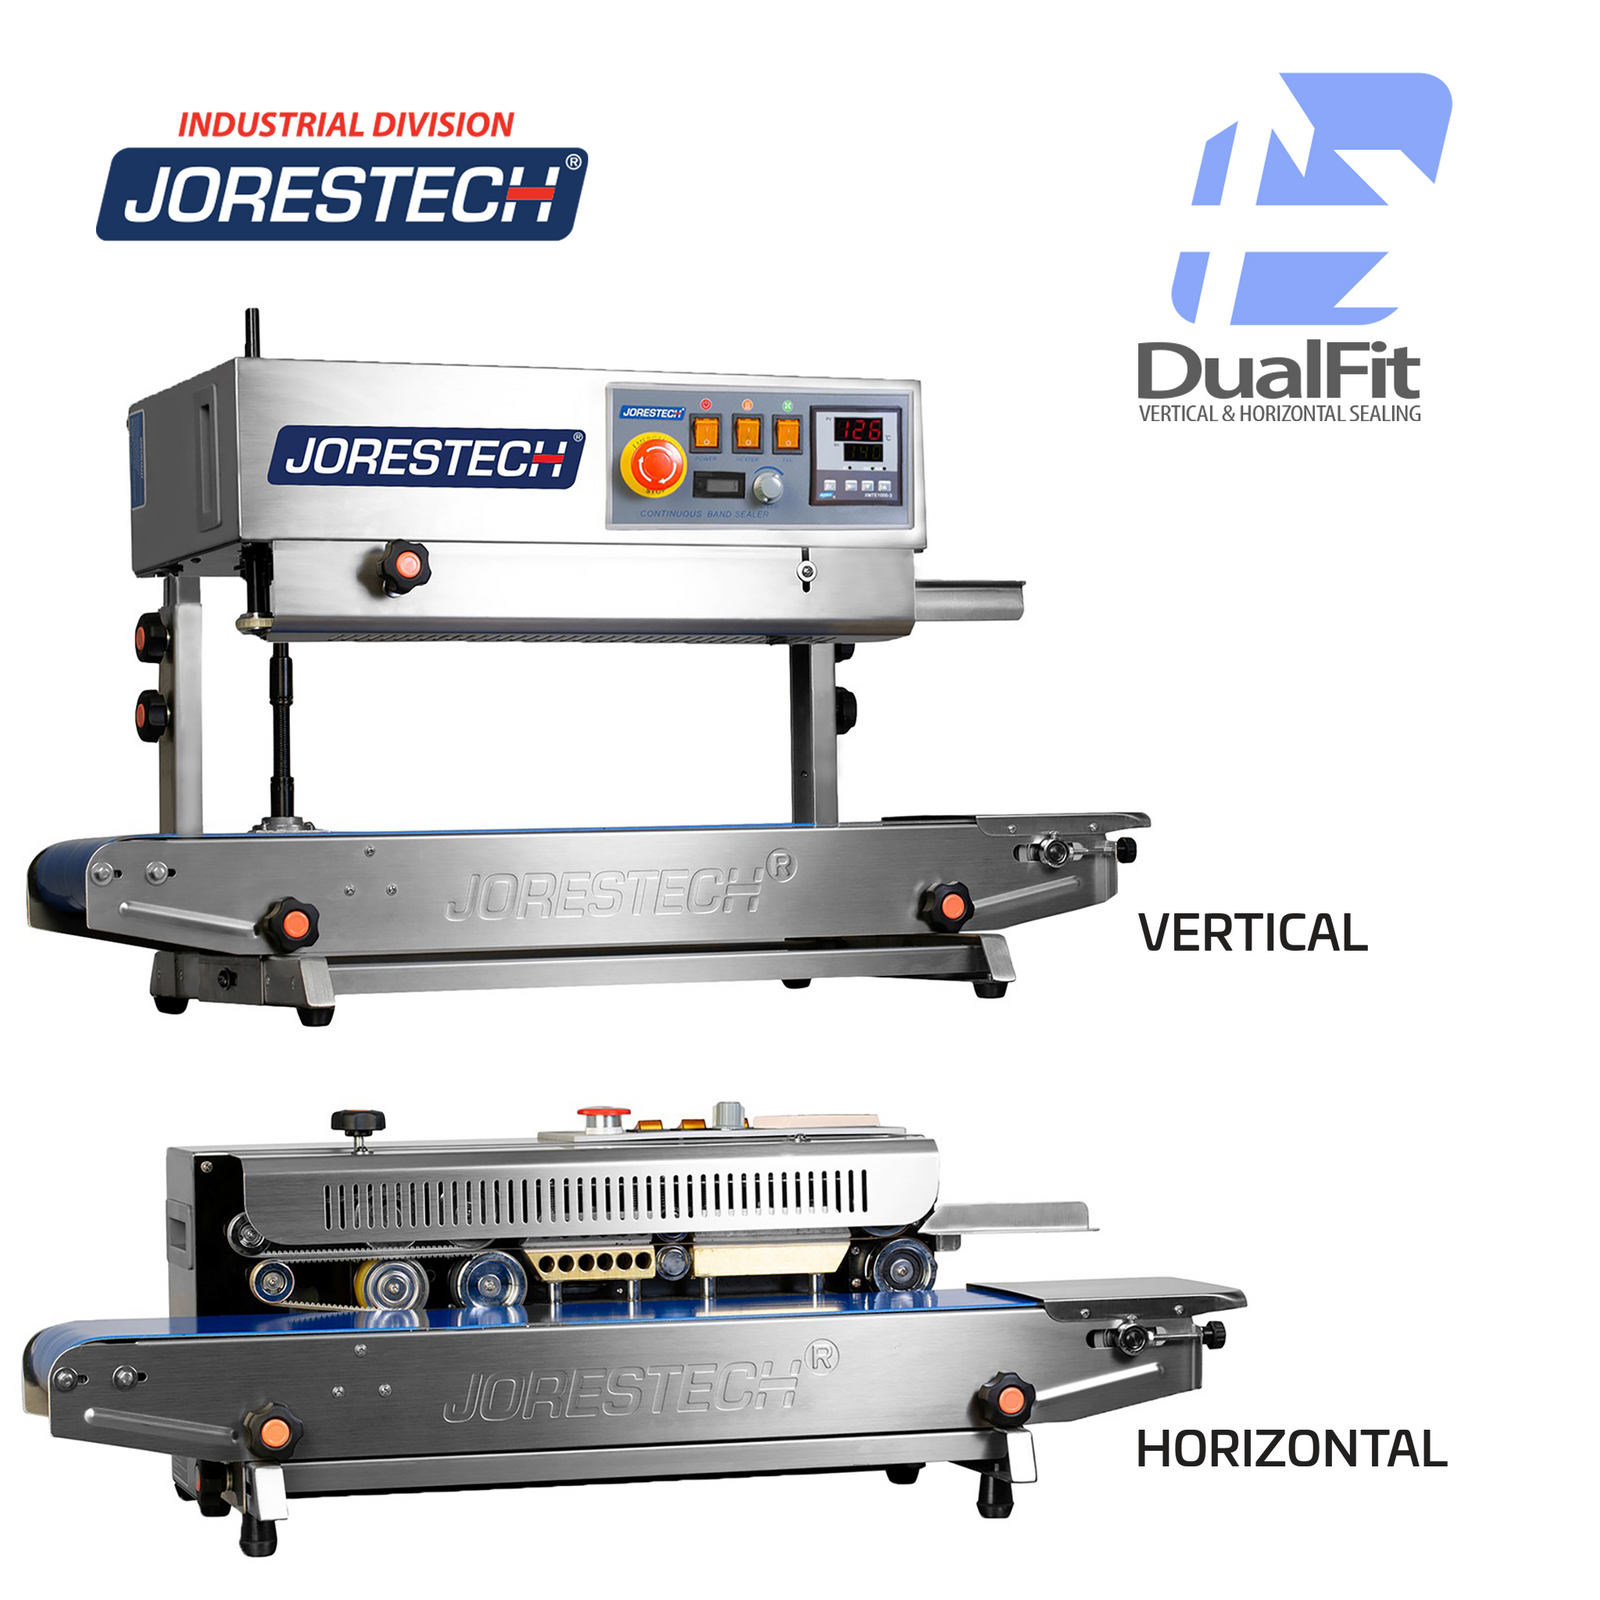 showing the vertical and horizontal positioning of the  stainless steel JORESTECH continuous band sealer with counter. Dual fit logo with arrows indicate that this table top bag sealer can be used for vertical and for horizontal applications. 